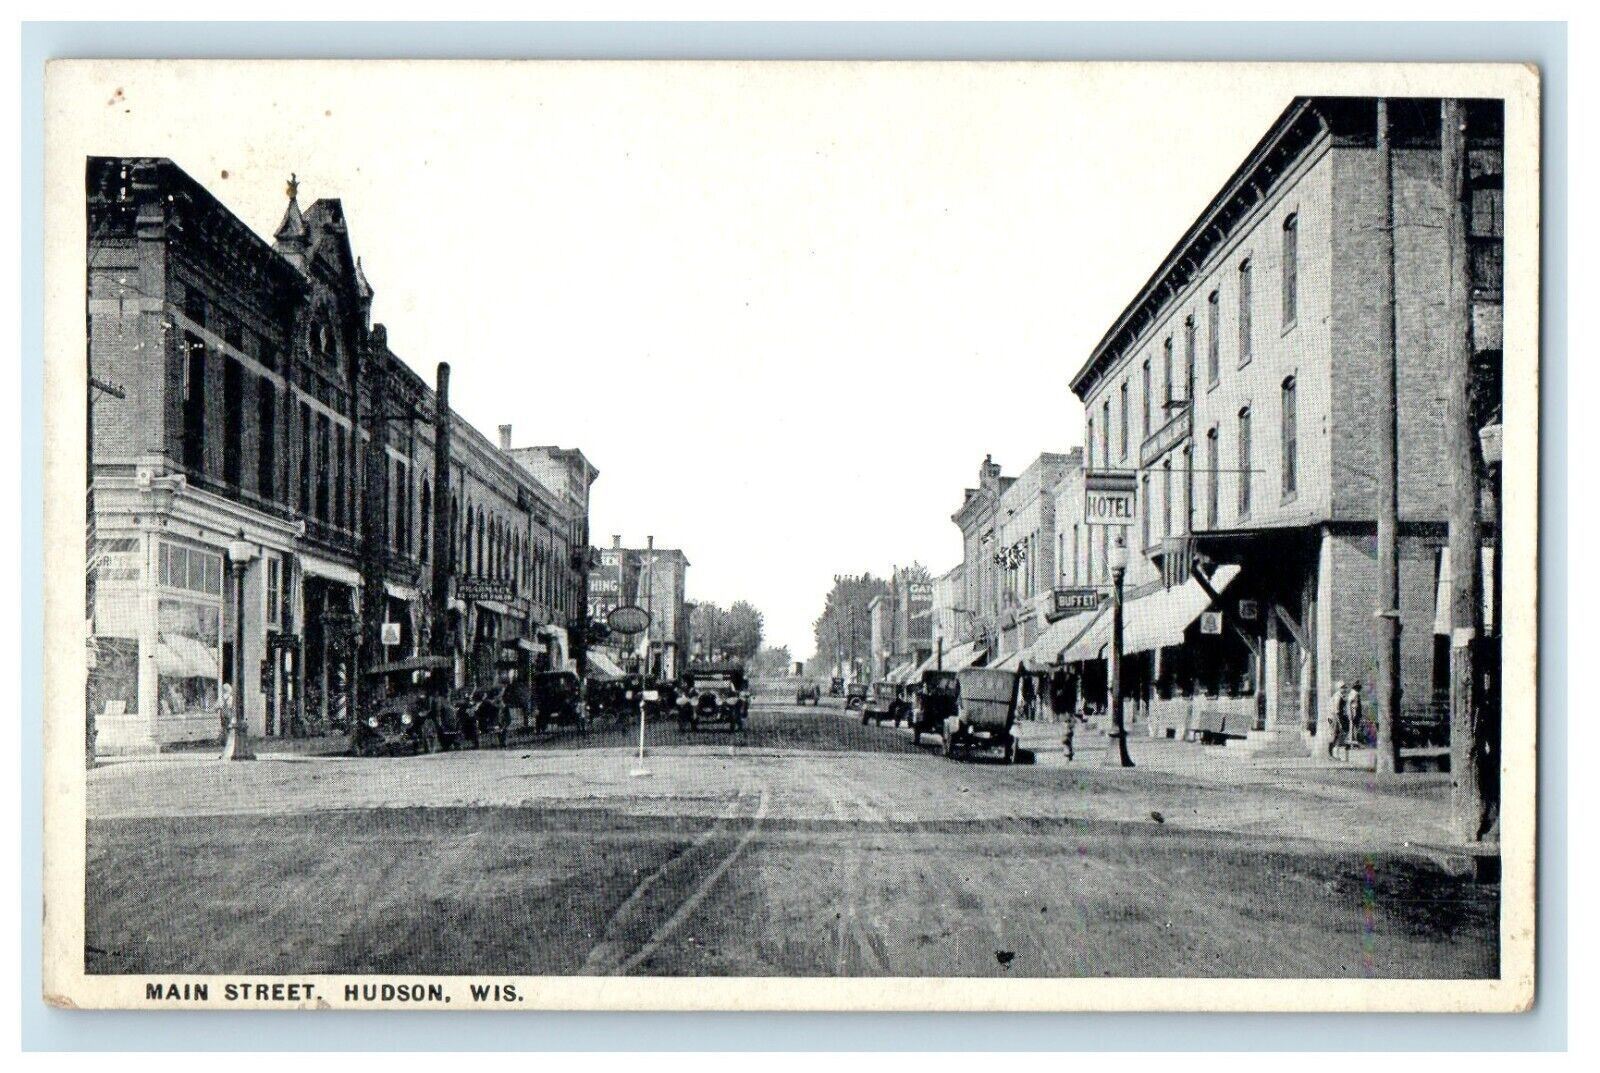 Main Street View Buffet Hotel Stores Cars Hudson Wisconsin WI Antique Postcard